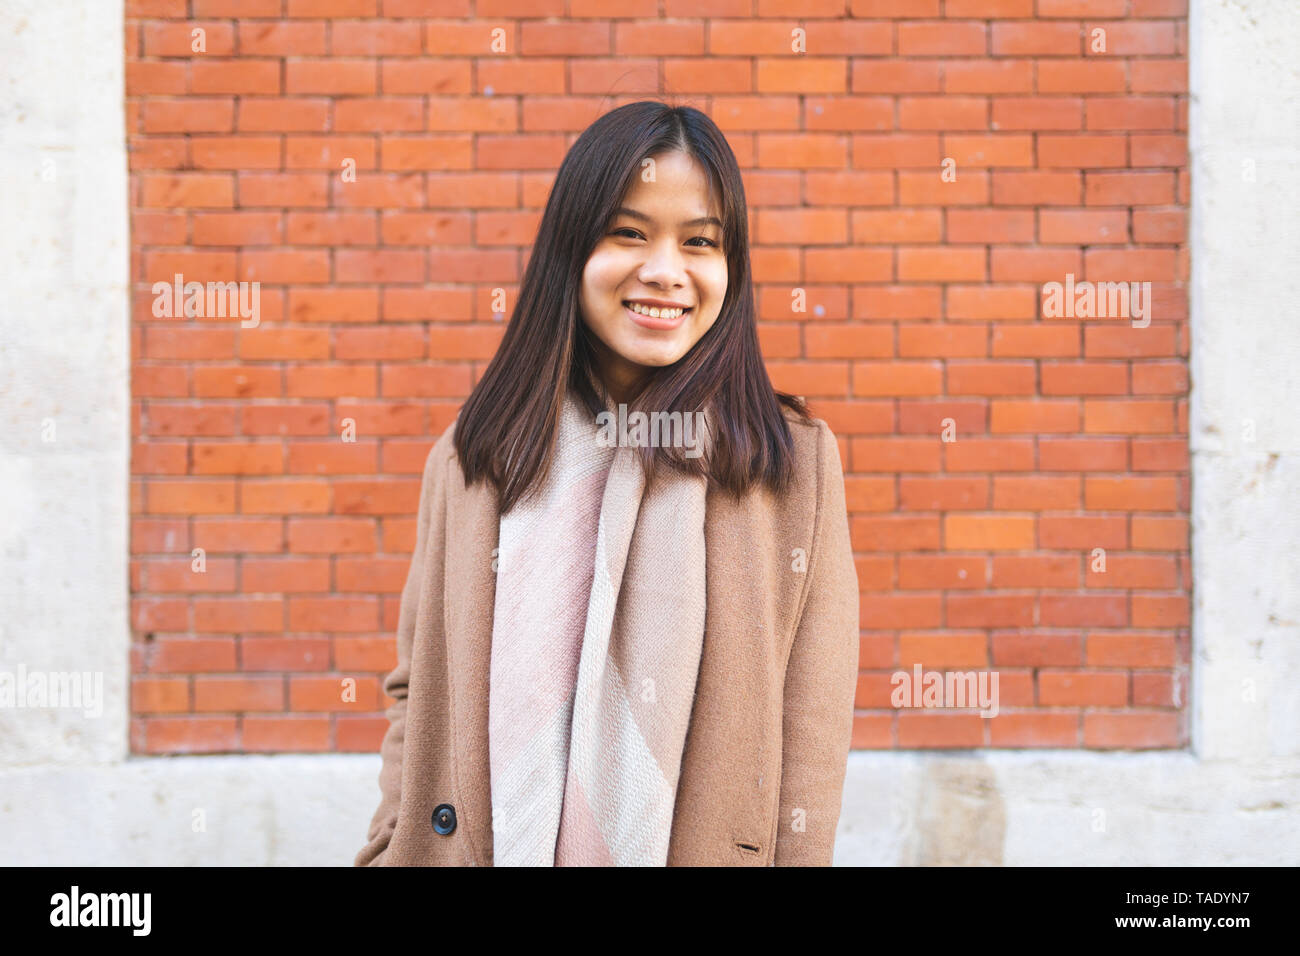 Portrait of smiling young woman at brick wall Banque D'Images